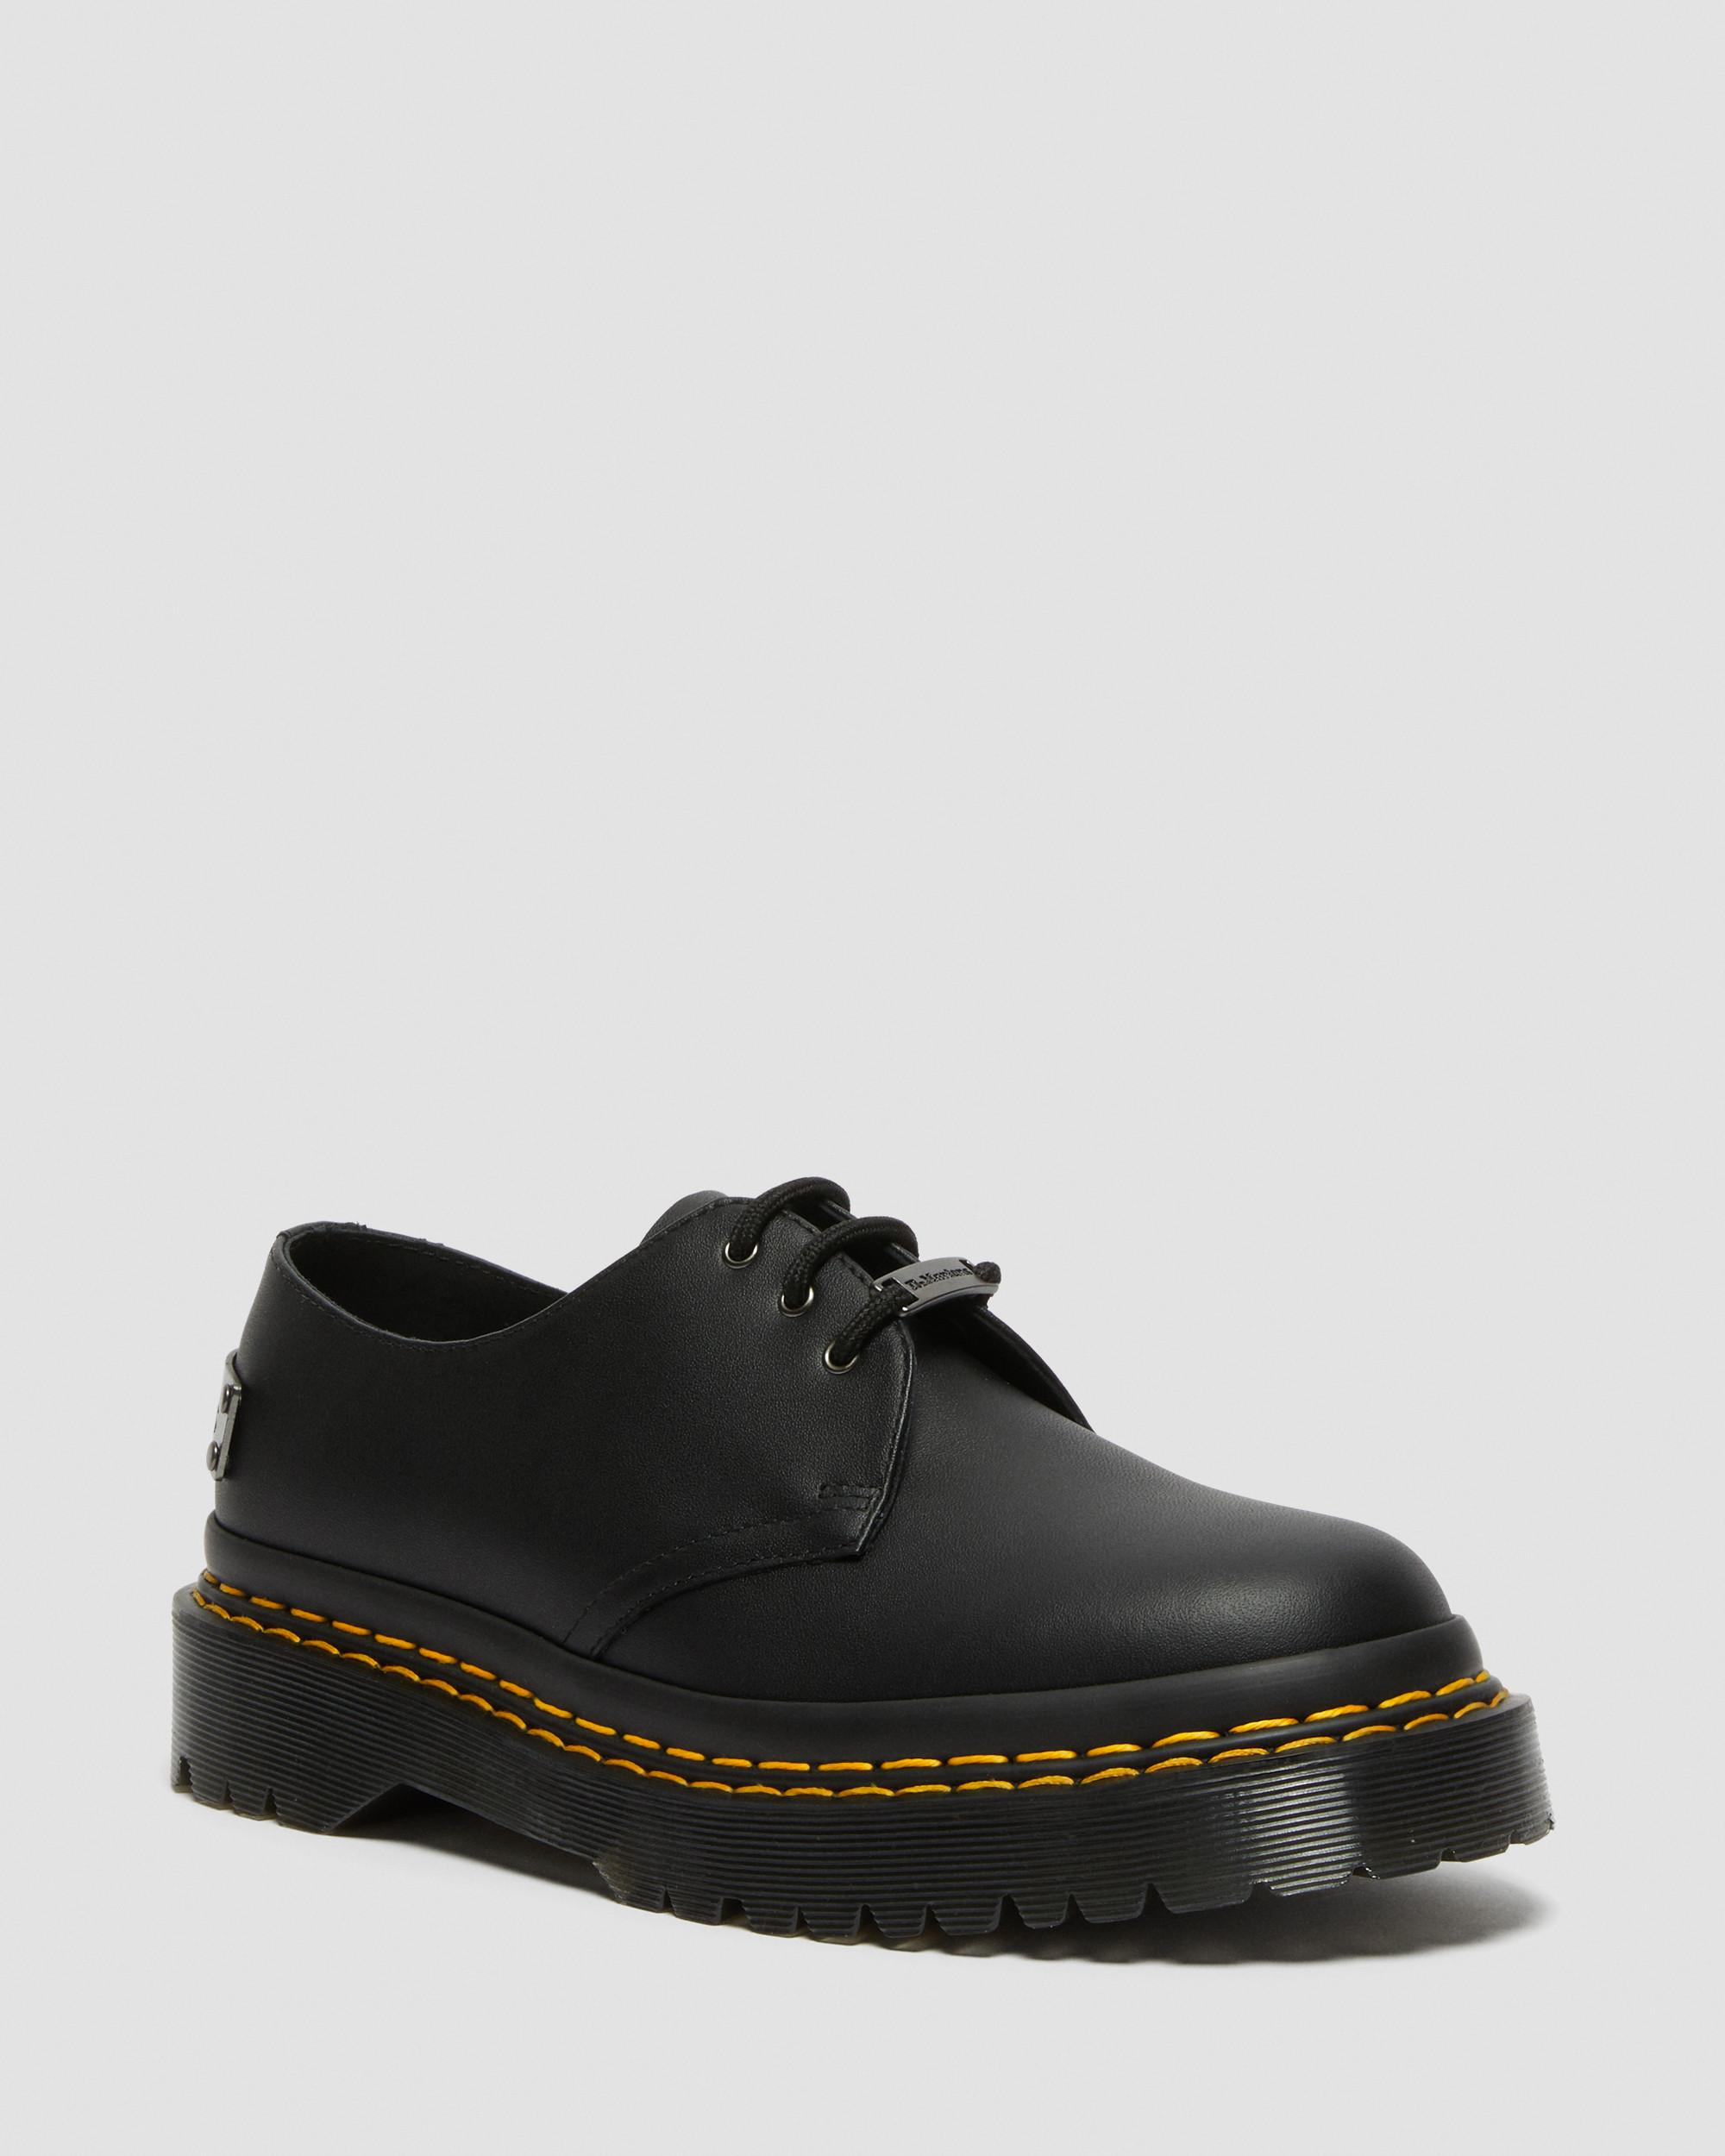 1461 Bex Double Stitch Leather Shoes in Black | Dr. Martens